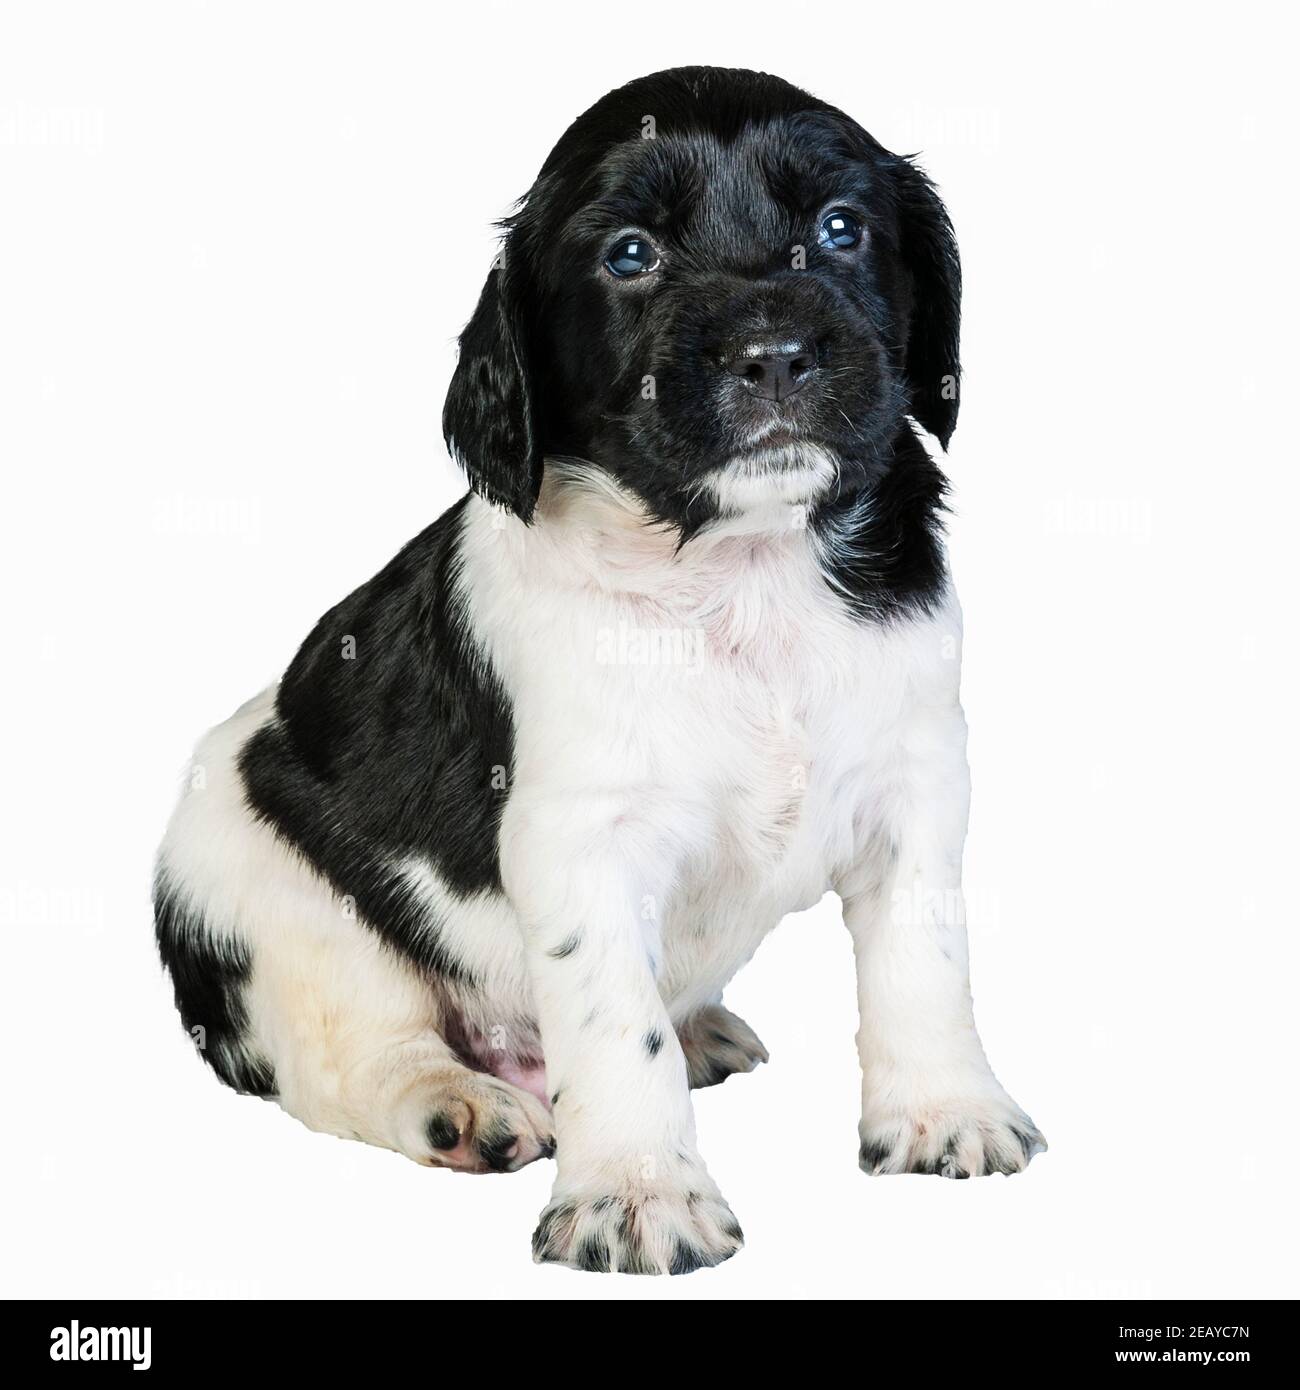 A 4 week old black and white English Springer Spaniel puppy Stock Photo